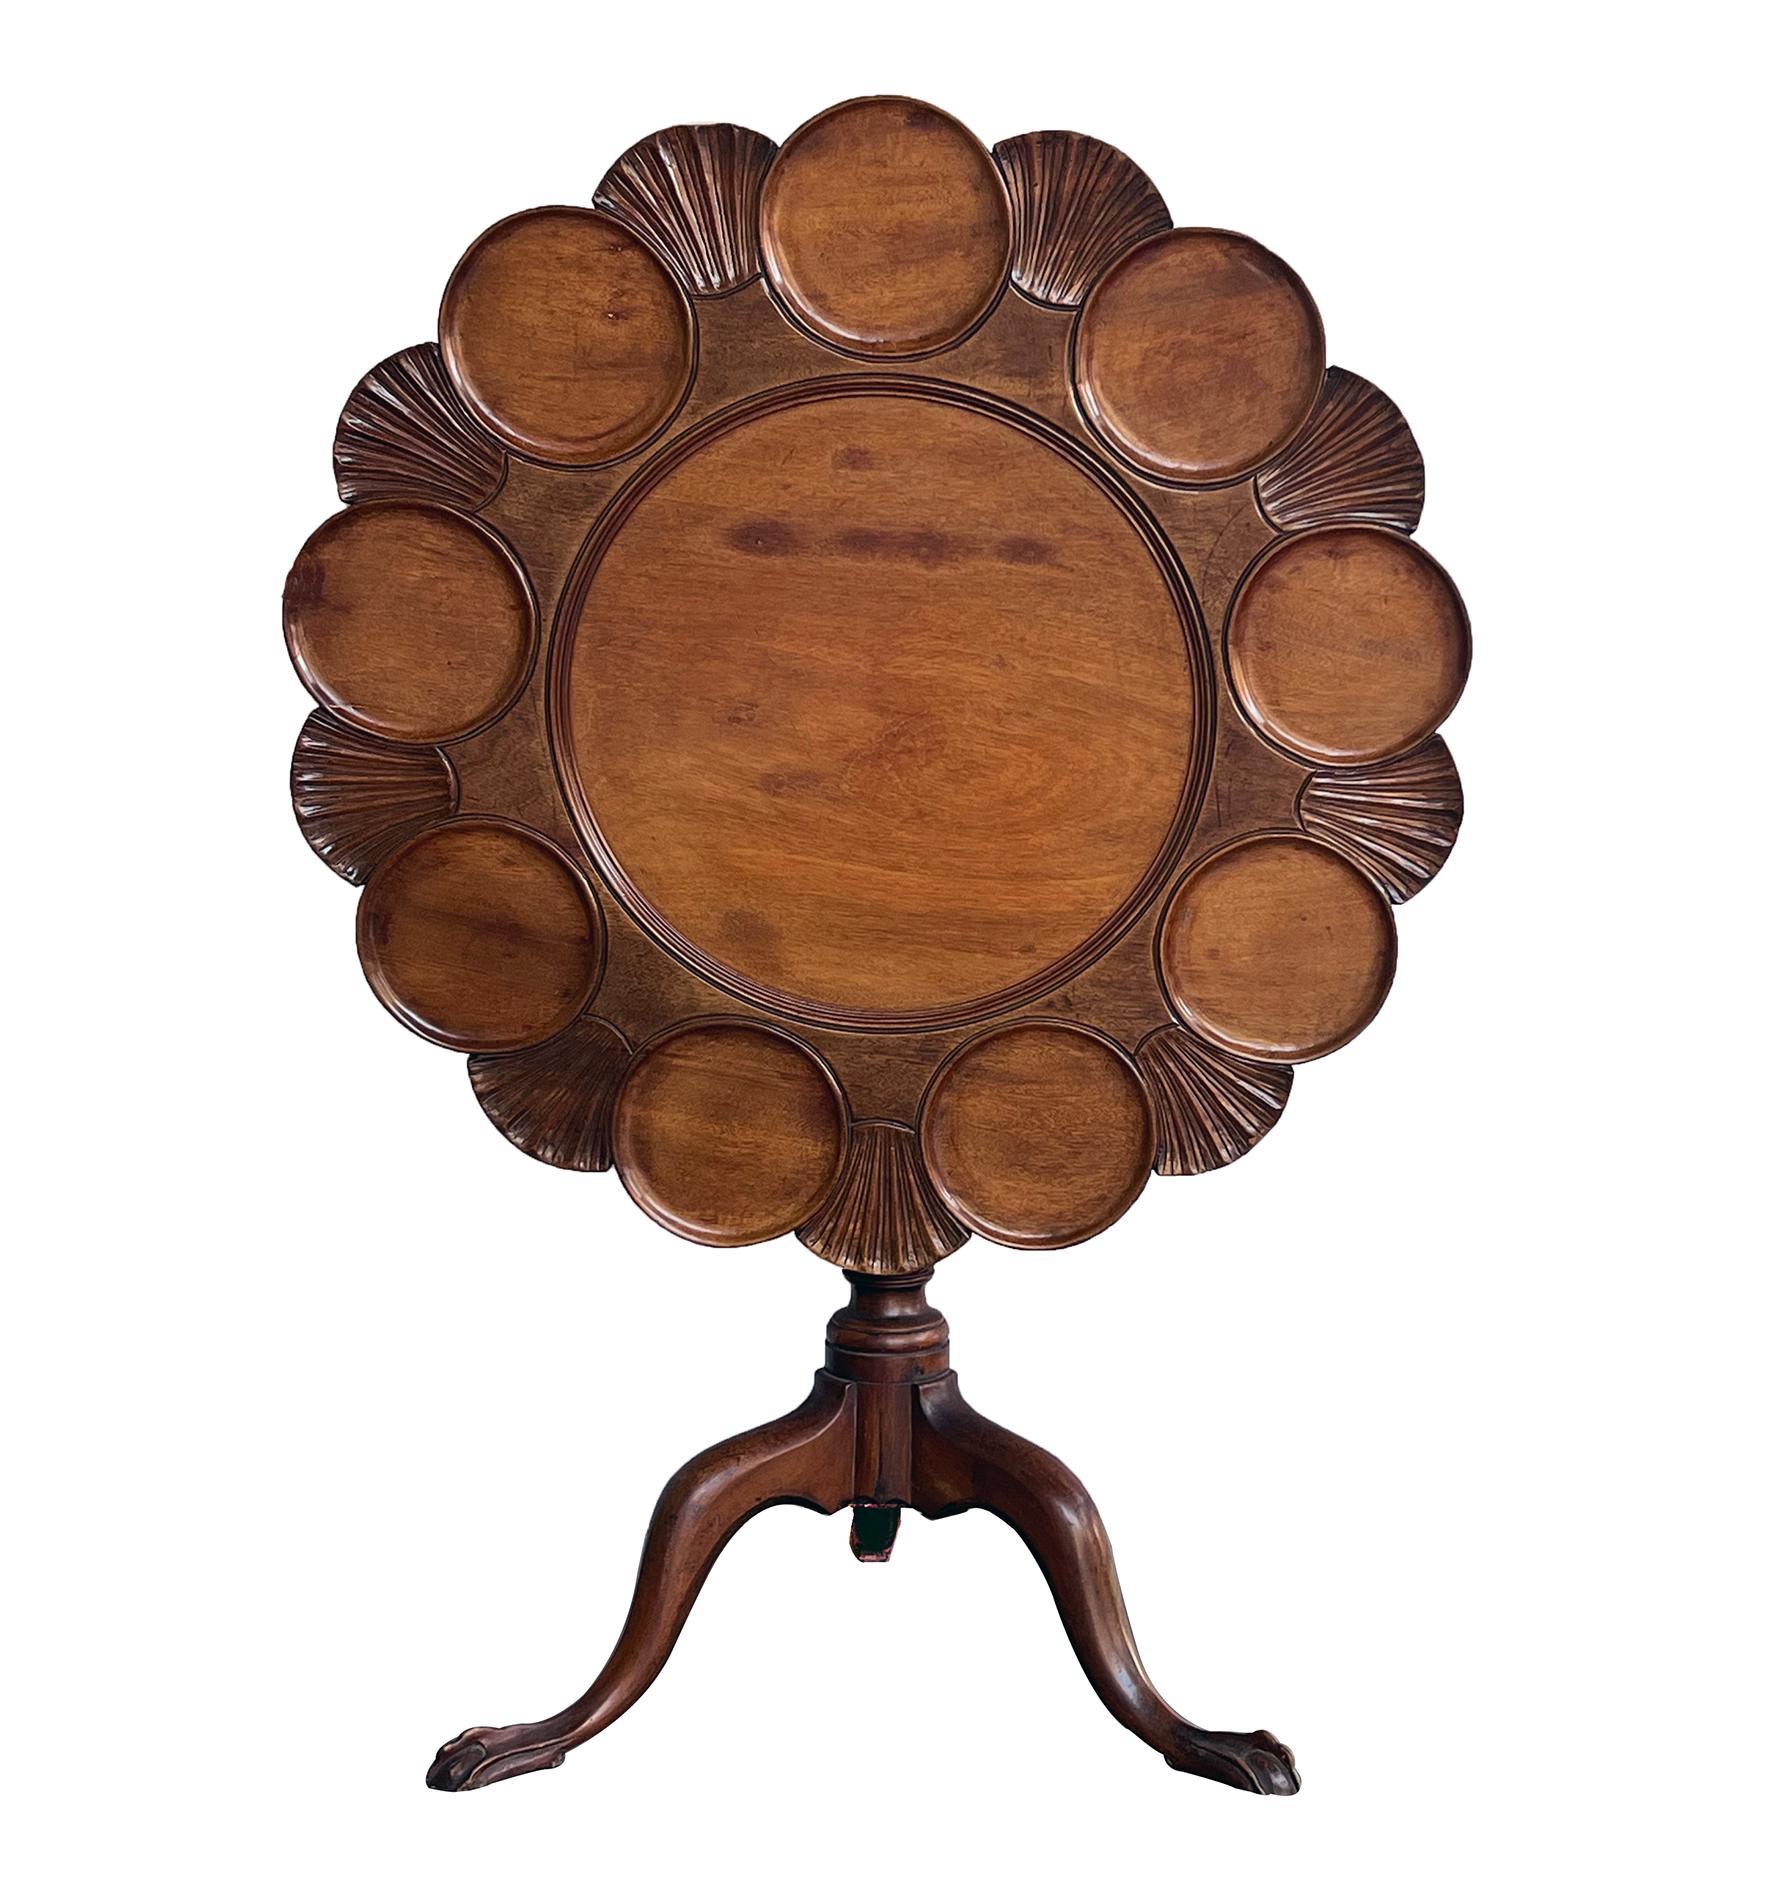 a wonderful period English George III hand-carved tilt-top supper/tea table with shell and leaf carved top with circular reserves, over a turned baluster support issuing three downswept legs terminating in ball and claw pad feet; the English supper